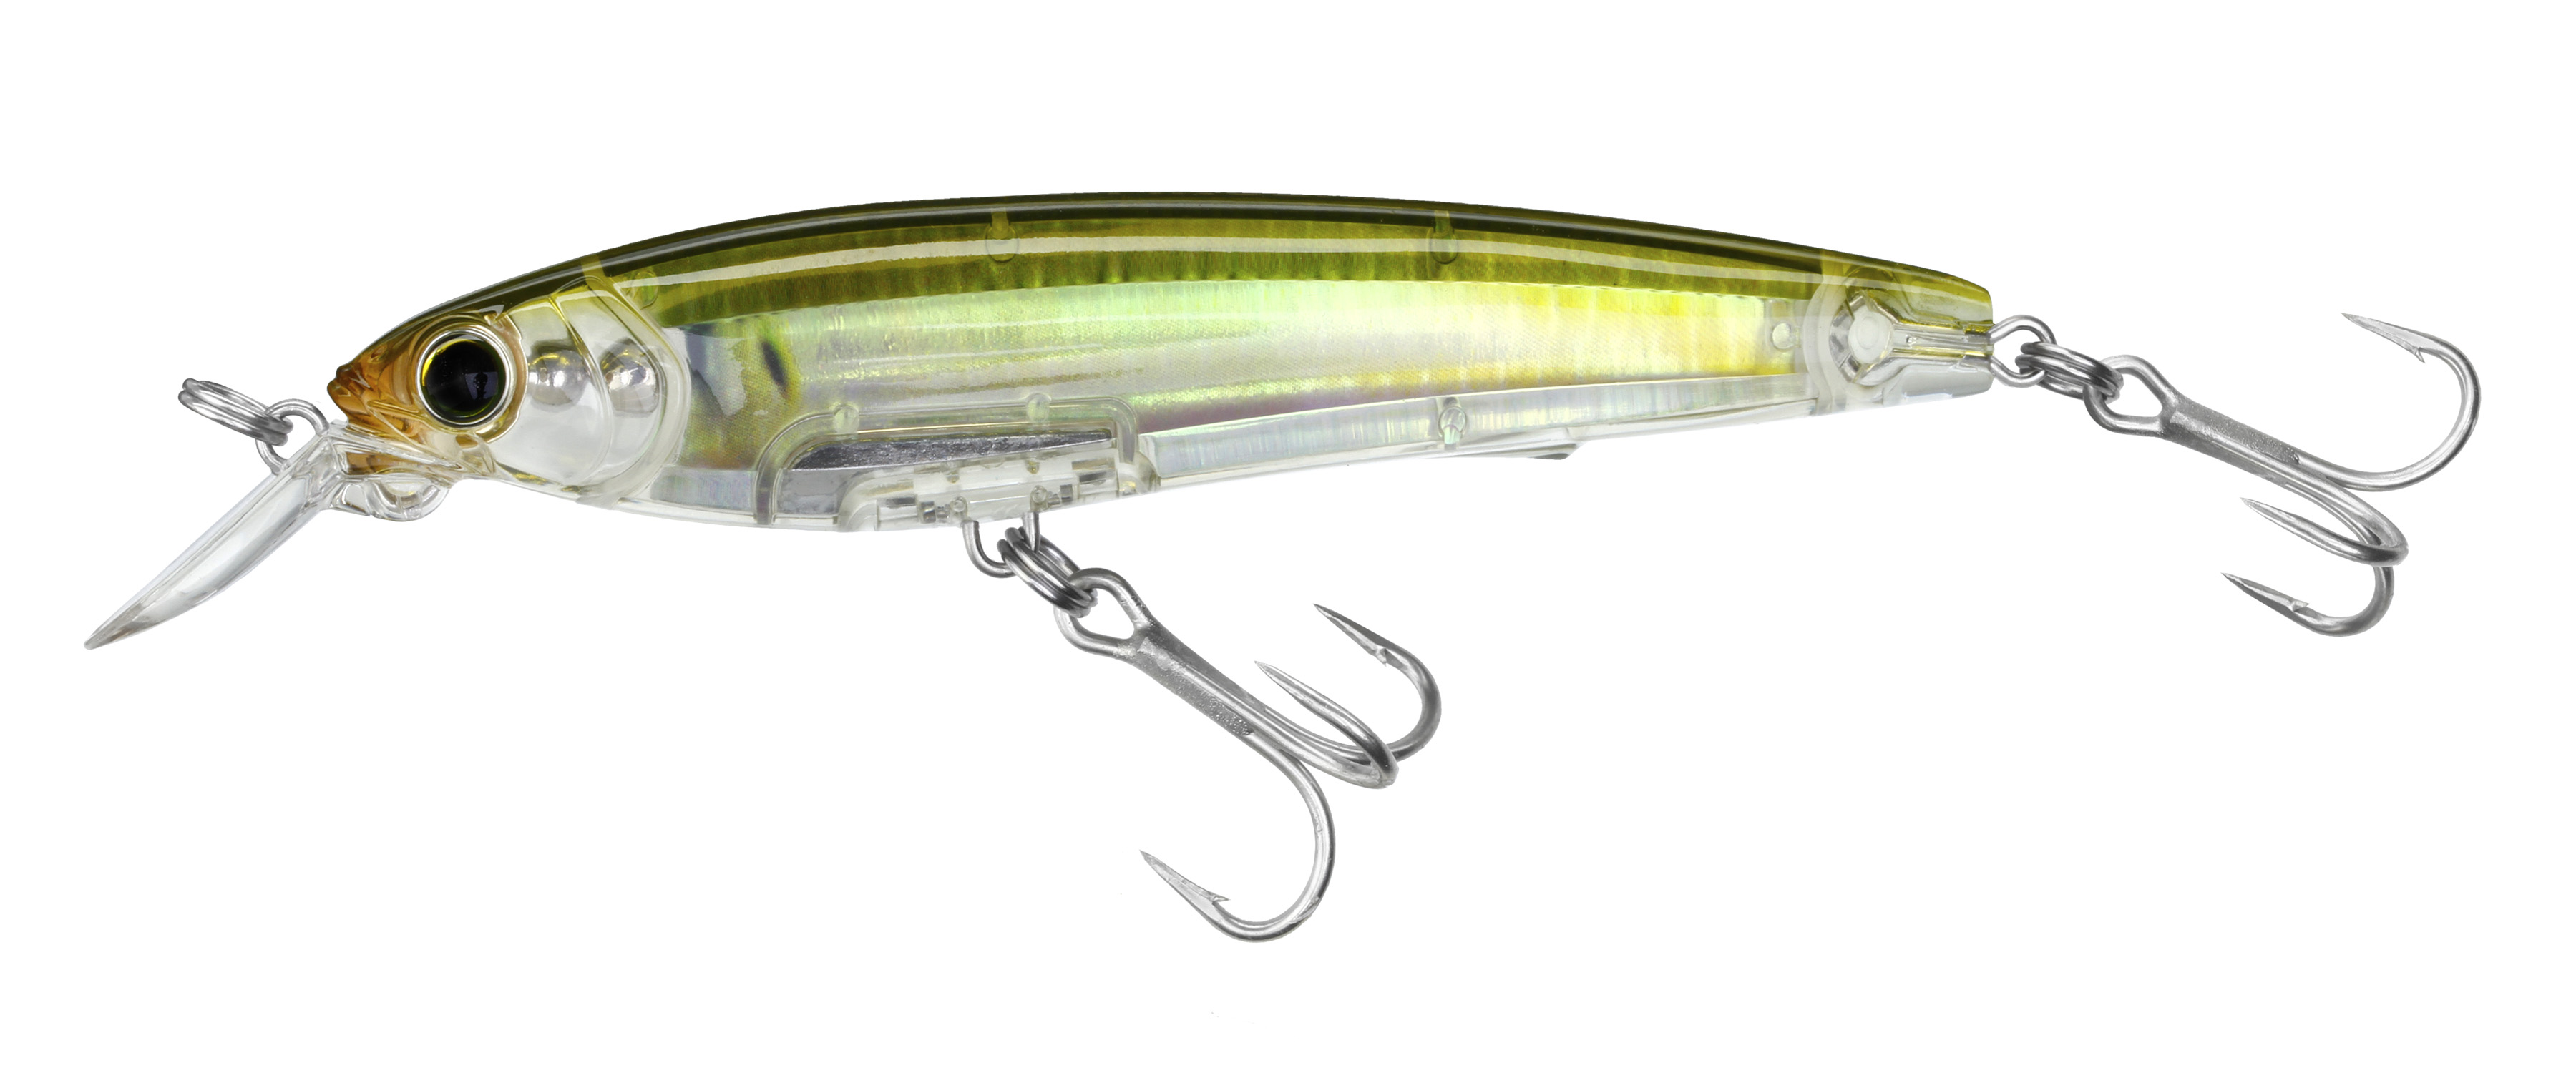  R1212-HGSH 3D Inshore Minnow, Color, Ghost Shad, 90mm